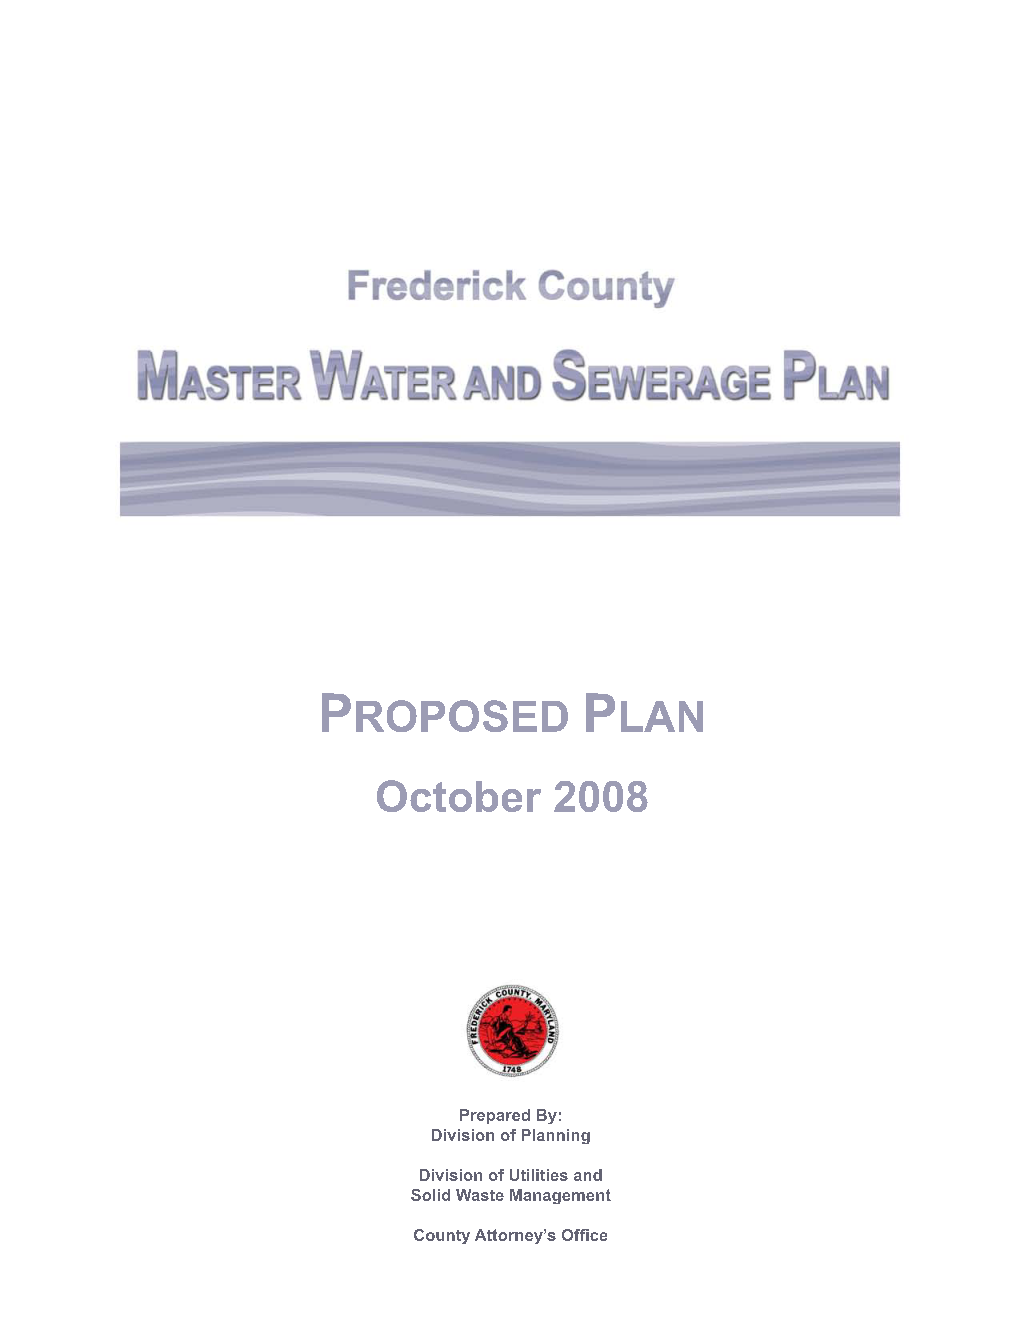 Frederick County Master Water and Sewerage Plan Proposed Plan